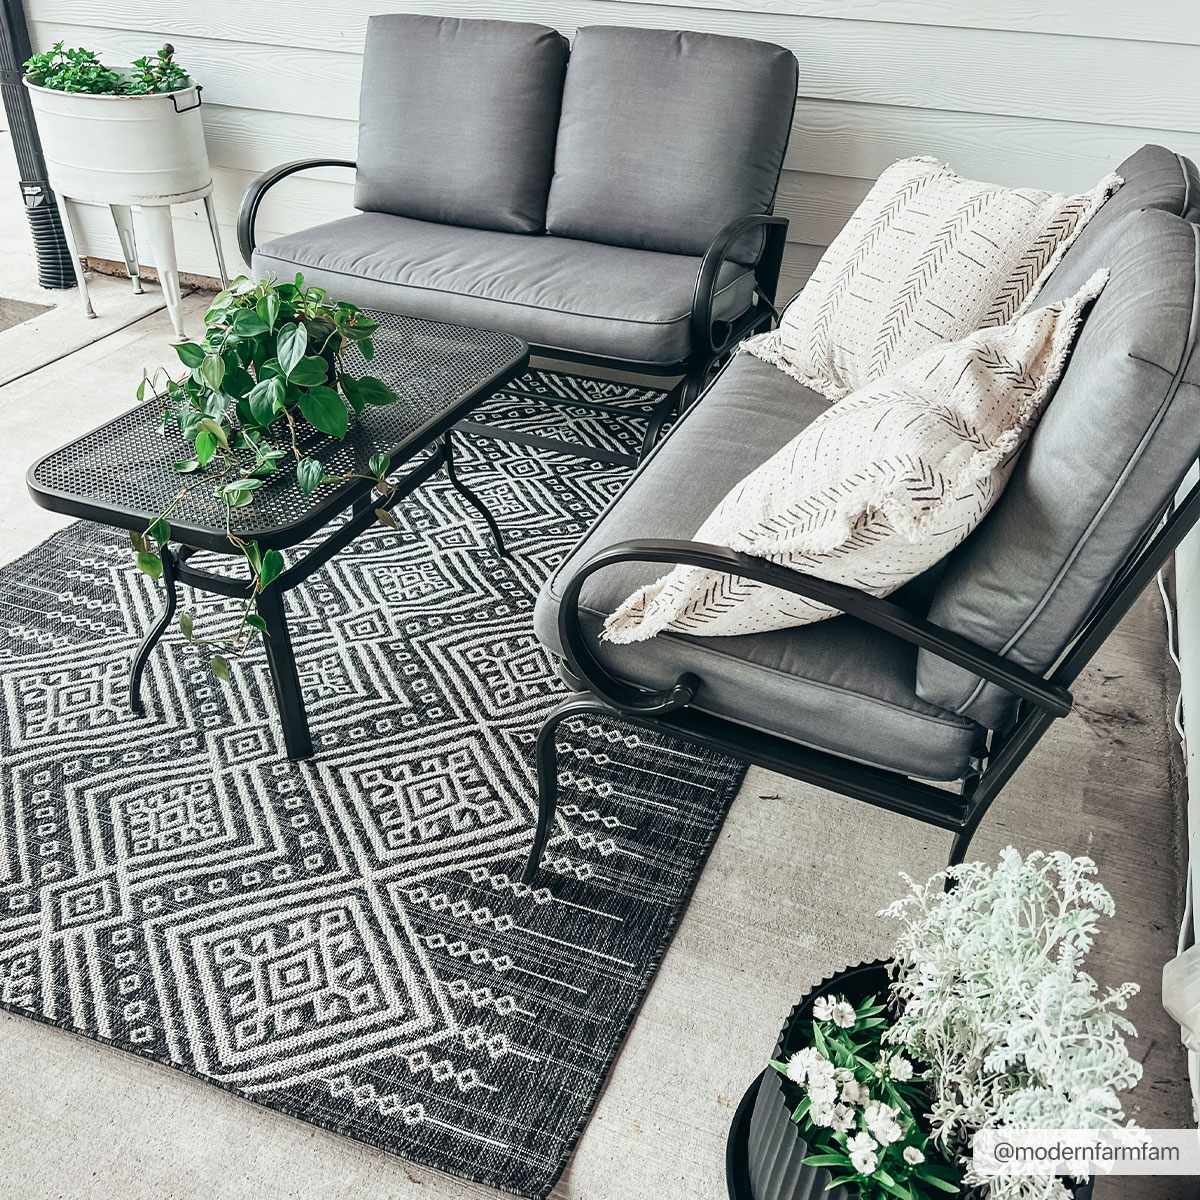 Outdoor Rugs at